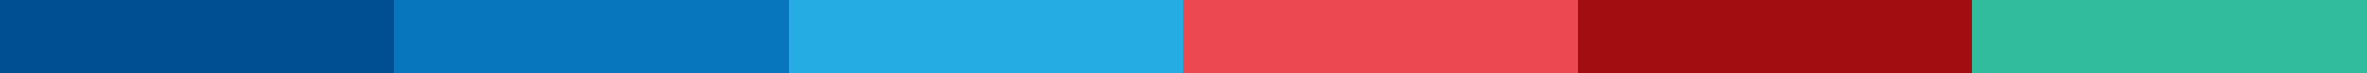 National Democratic Trading Committee color palette